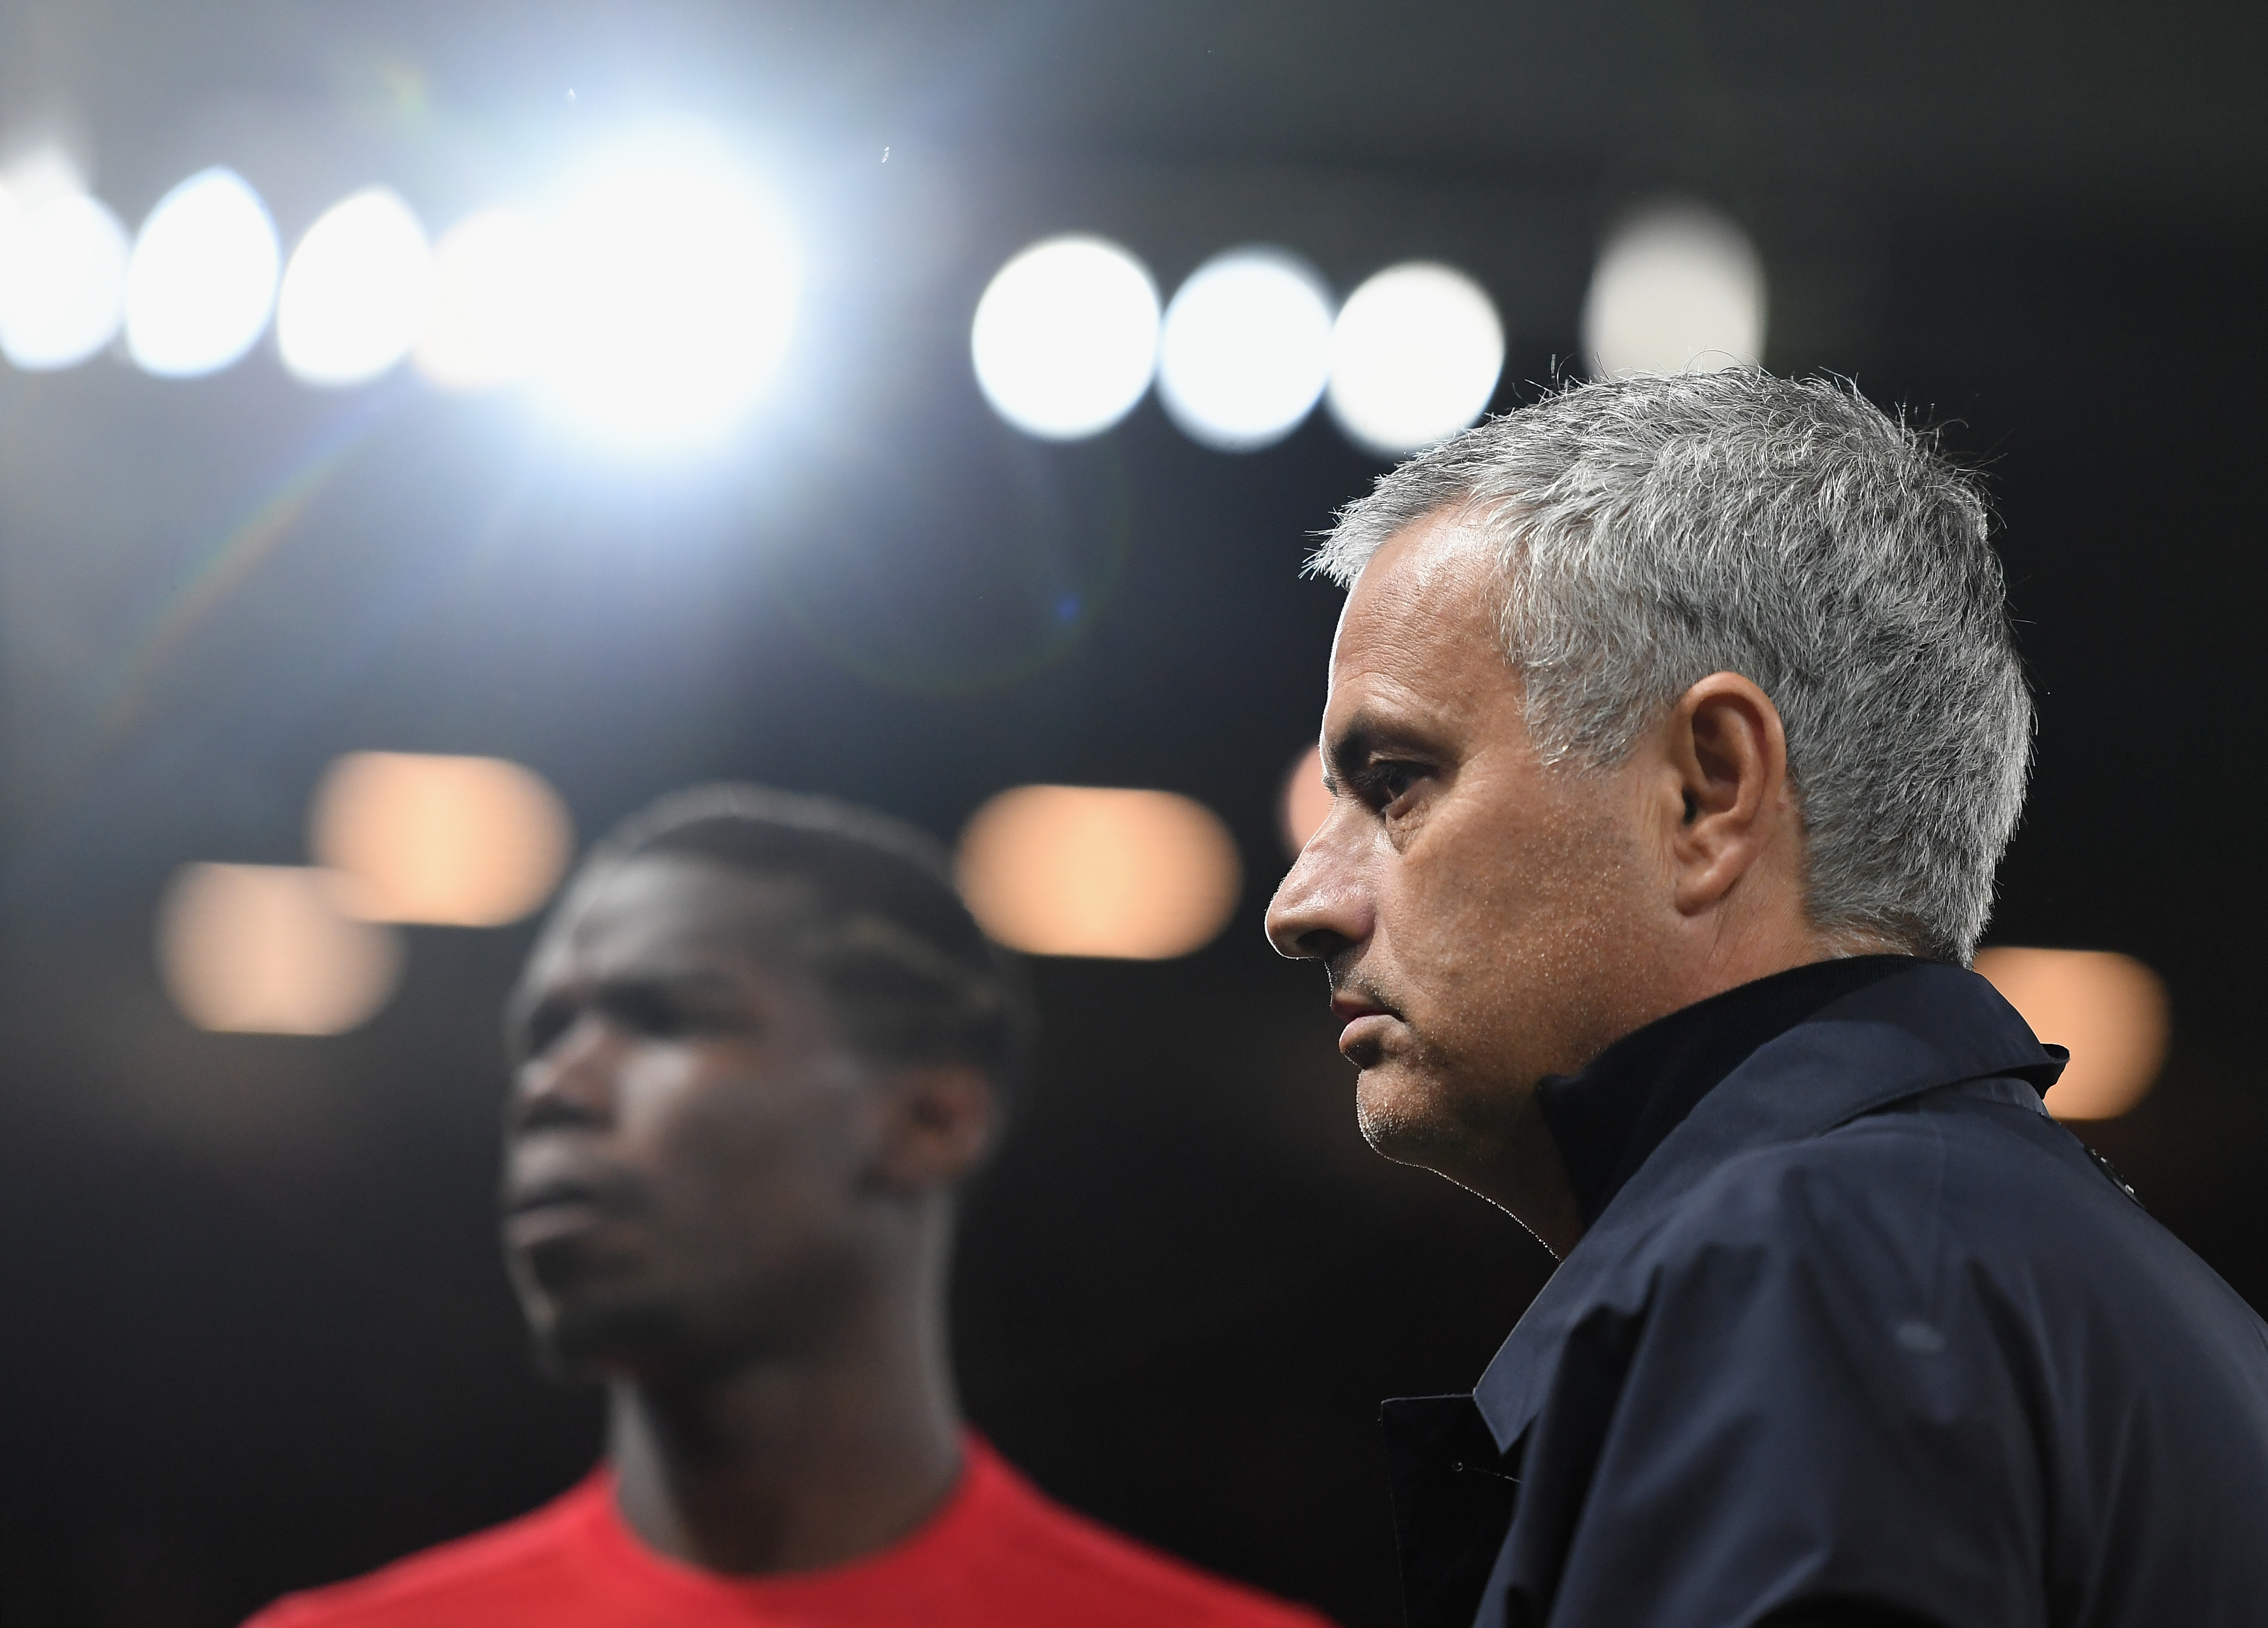 MANCHESTER, ENGLAND - SEPTEMBER 29:  Jose Mourinho, Manager of Manchester United looks on prior to kickoff during the UEFA Europa League group A match between Manchester United FC and FC Zorya Luhansk at Old Trafford on September 29, 2016 in Manchester, England.  (Photo by Laurence Griffiths/Getty Images)